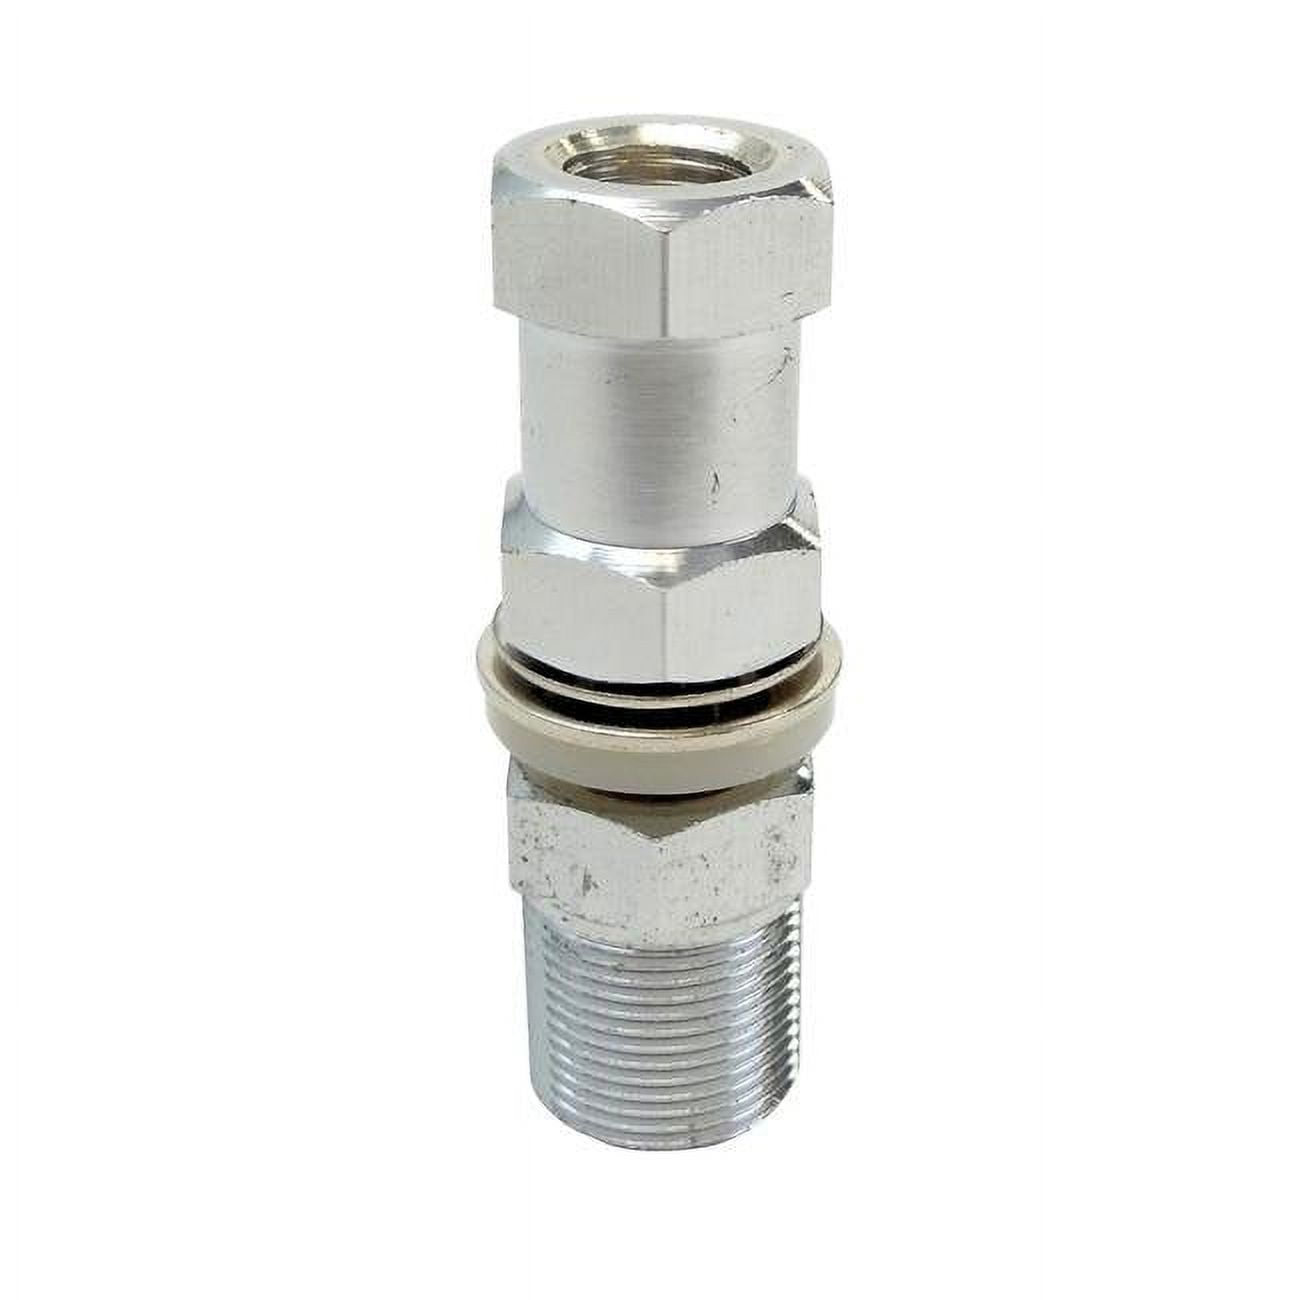 Picture of Accessories Unlimited AUC6 0.38 x 24 in. Stainless Steel Stud with SO239 Connection